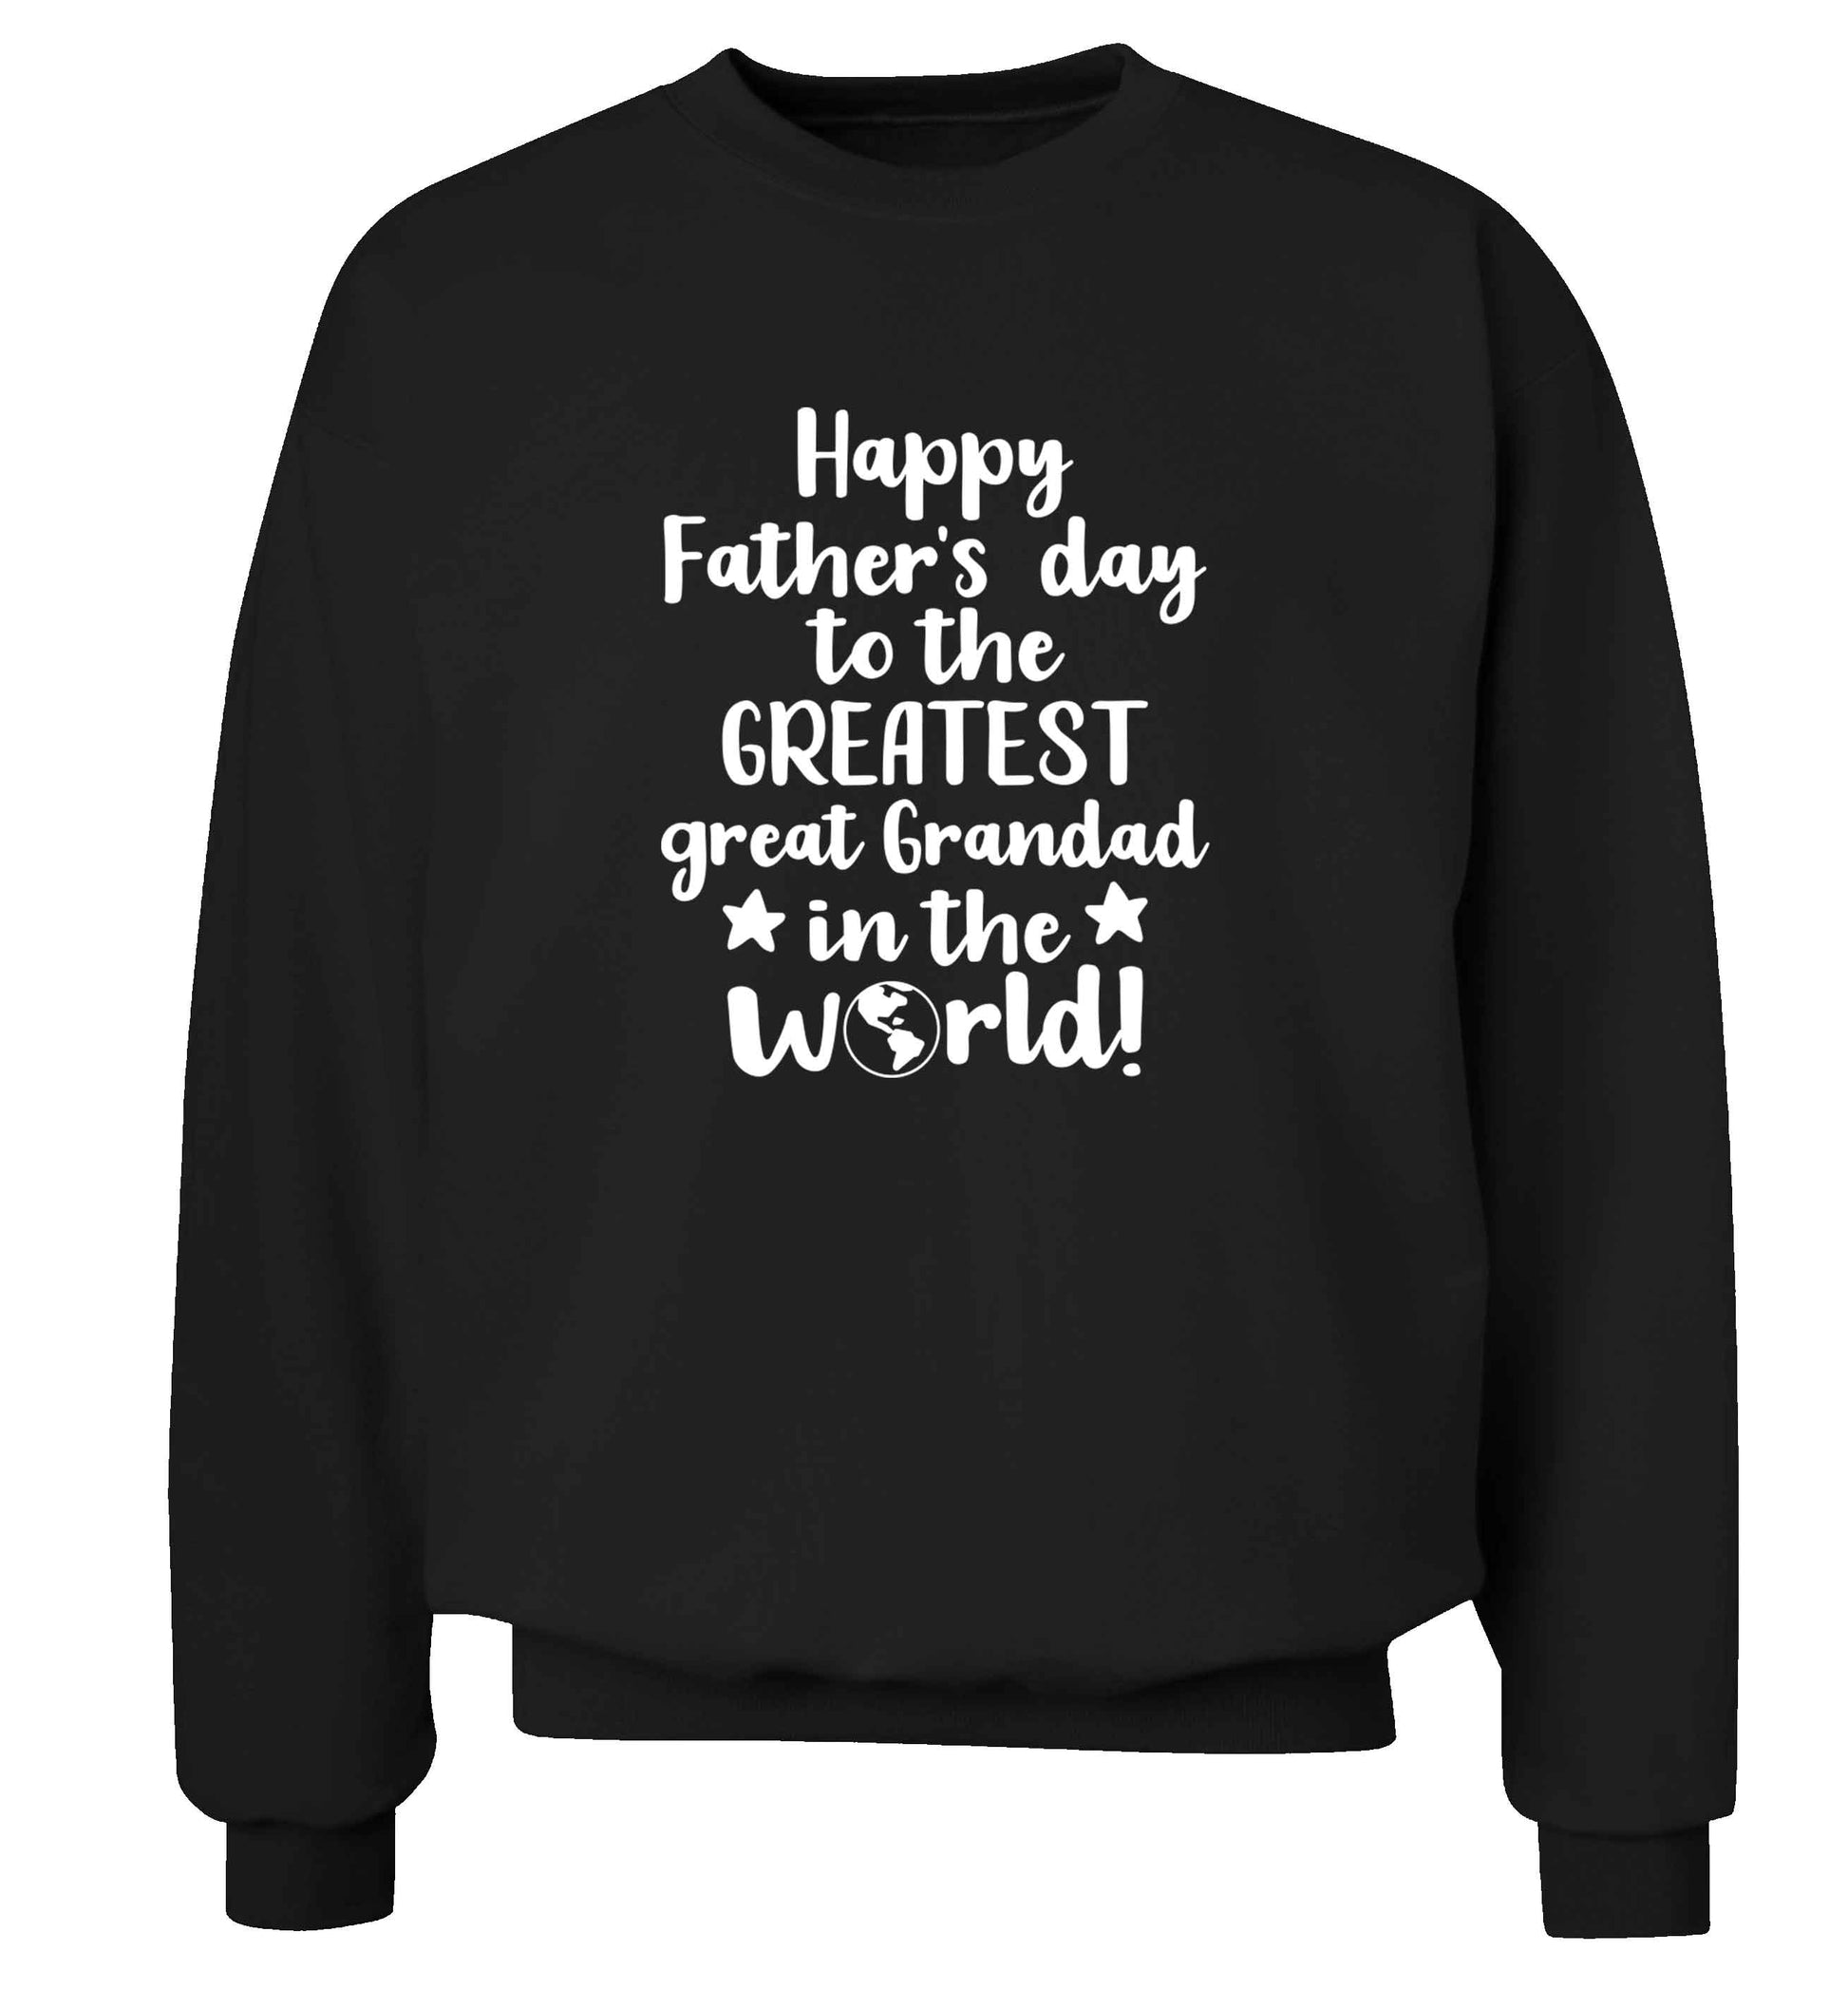 Happy Father's day to the greatest great grandad in the world adult's unisex black sweater 2XL